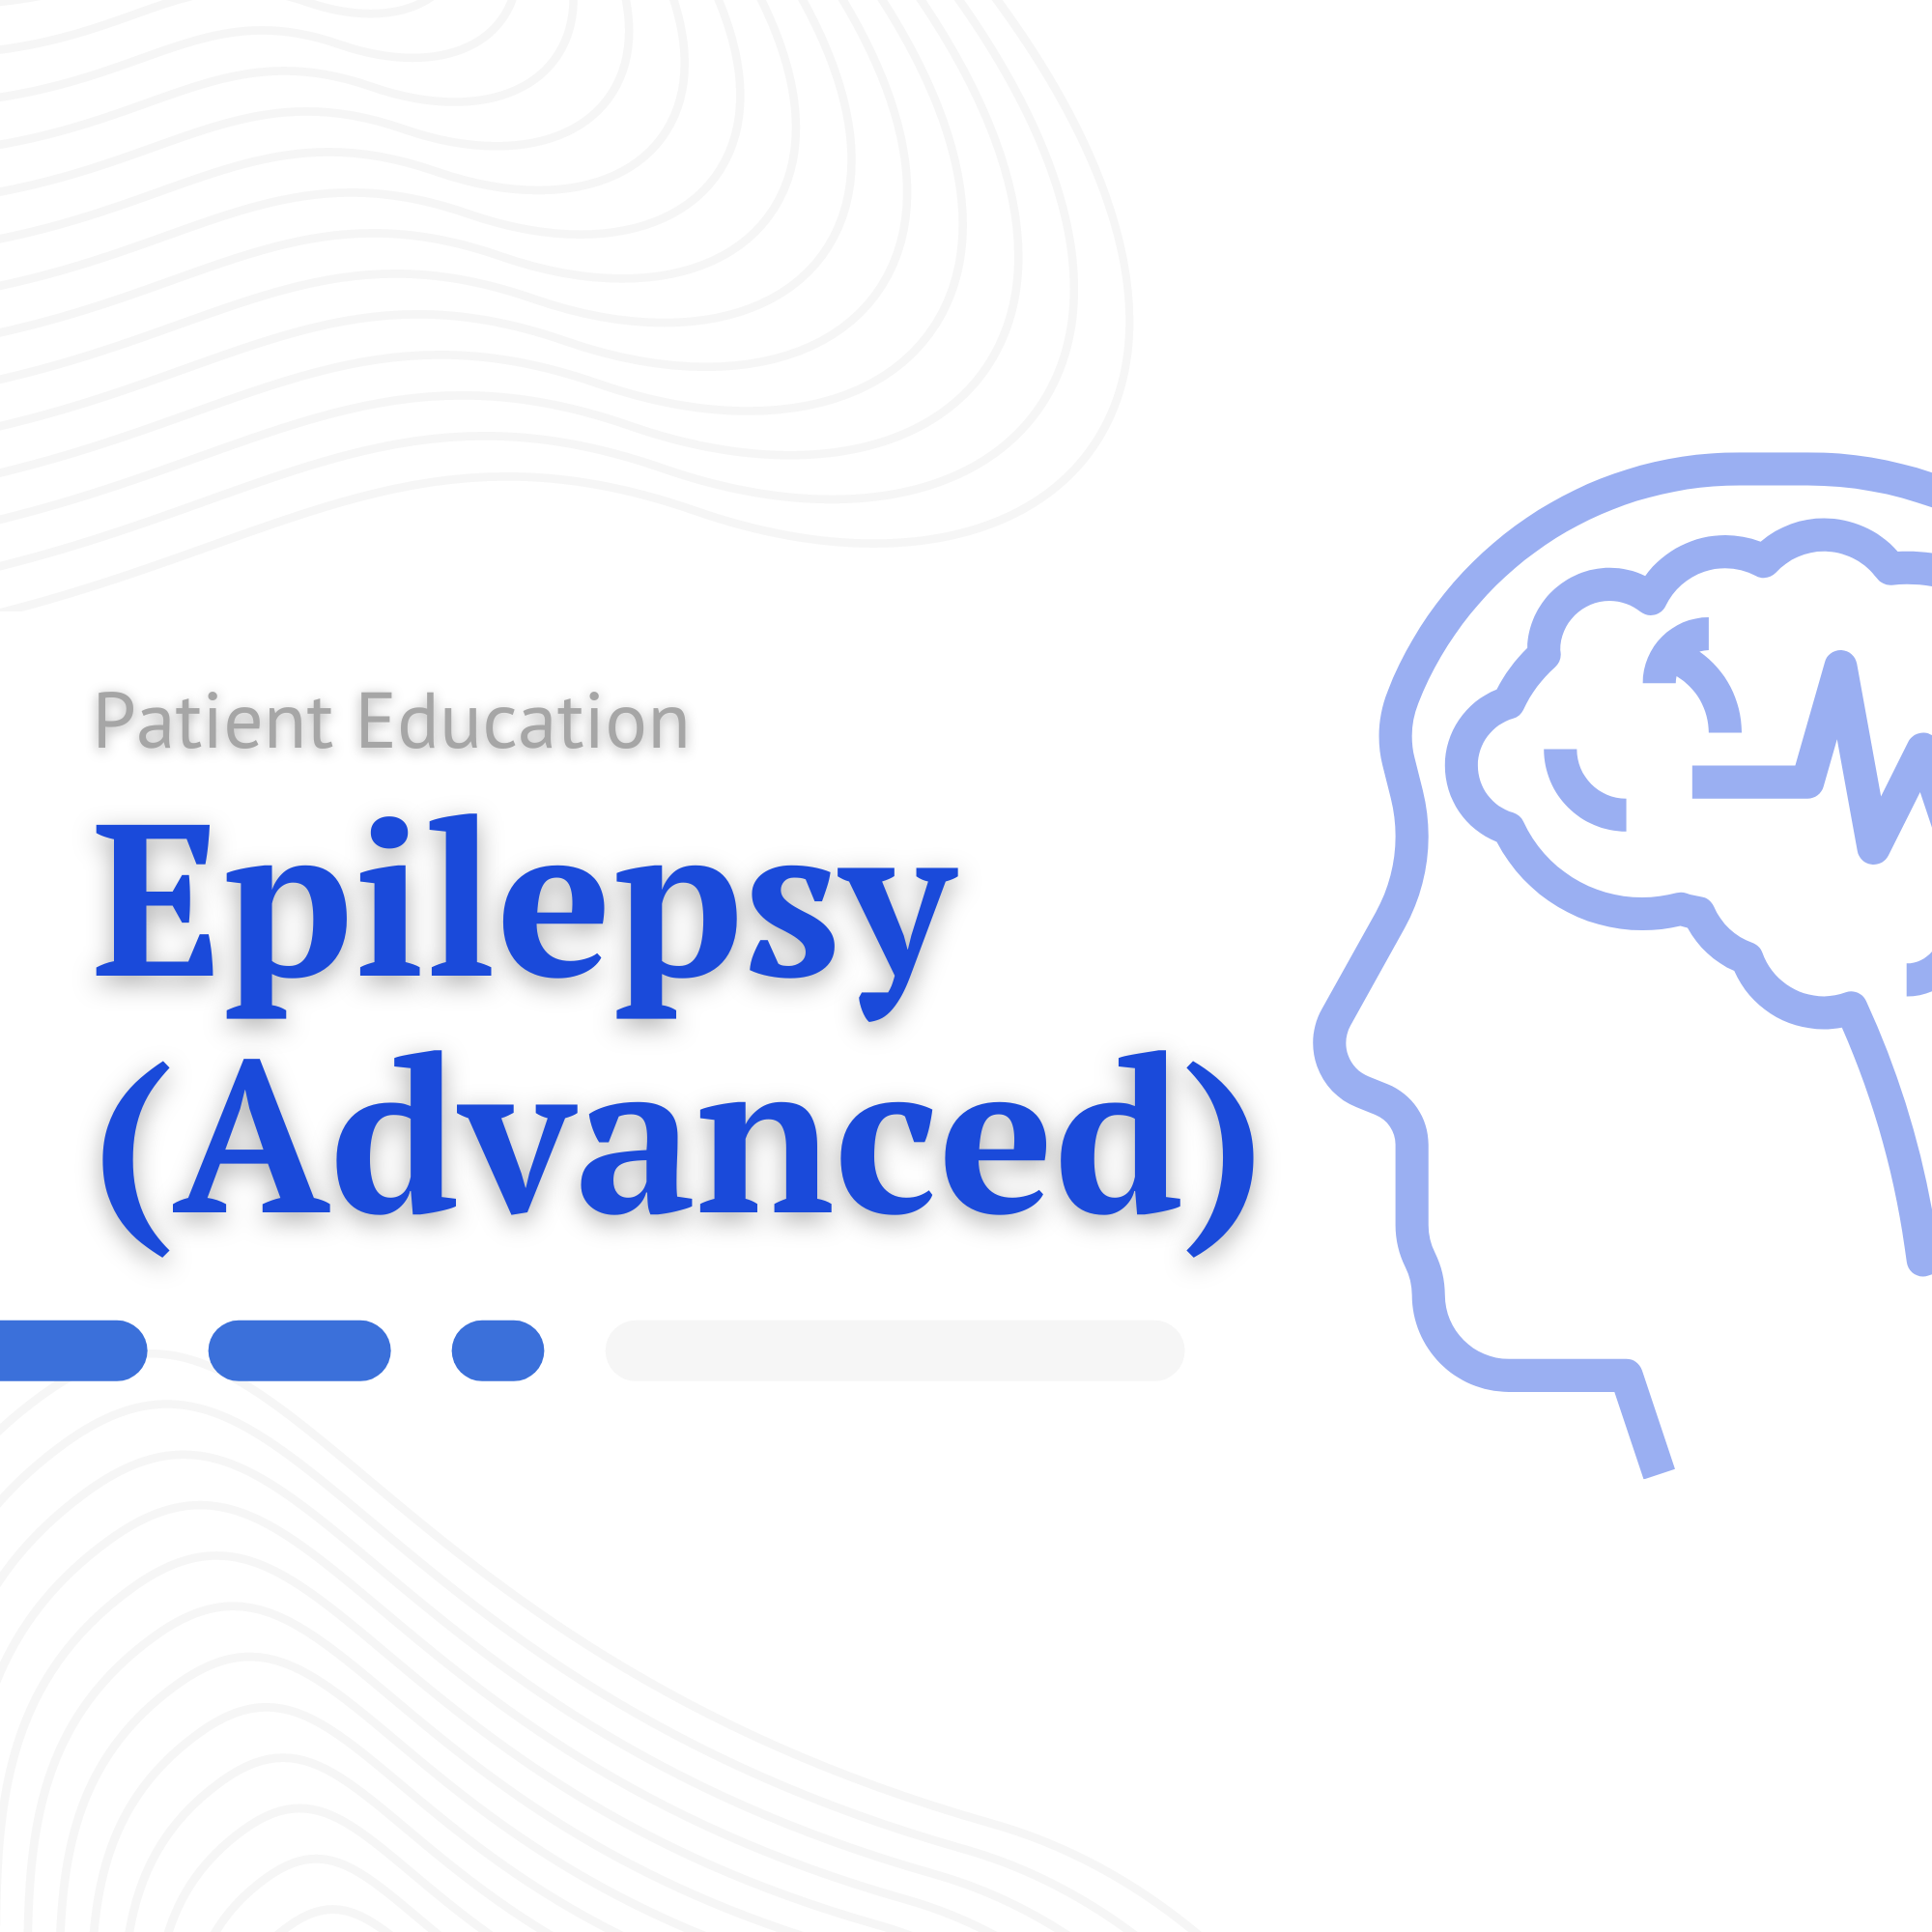 Epilepsy (Advanced) Cover Photo.png